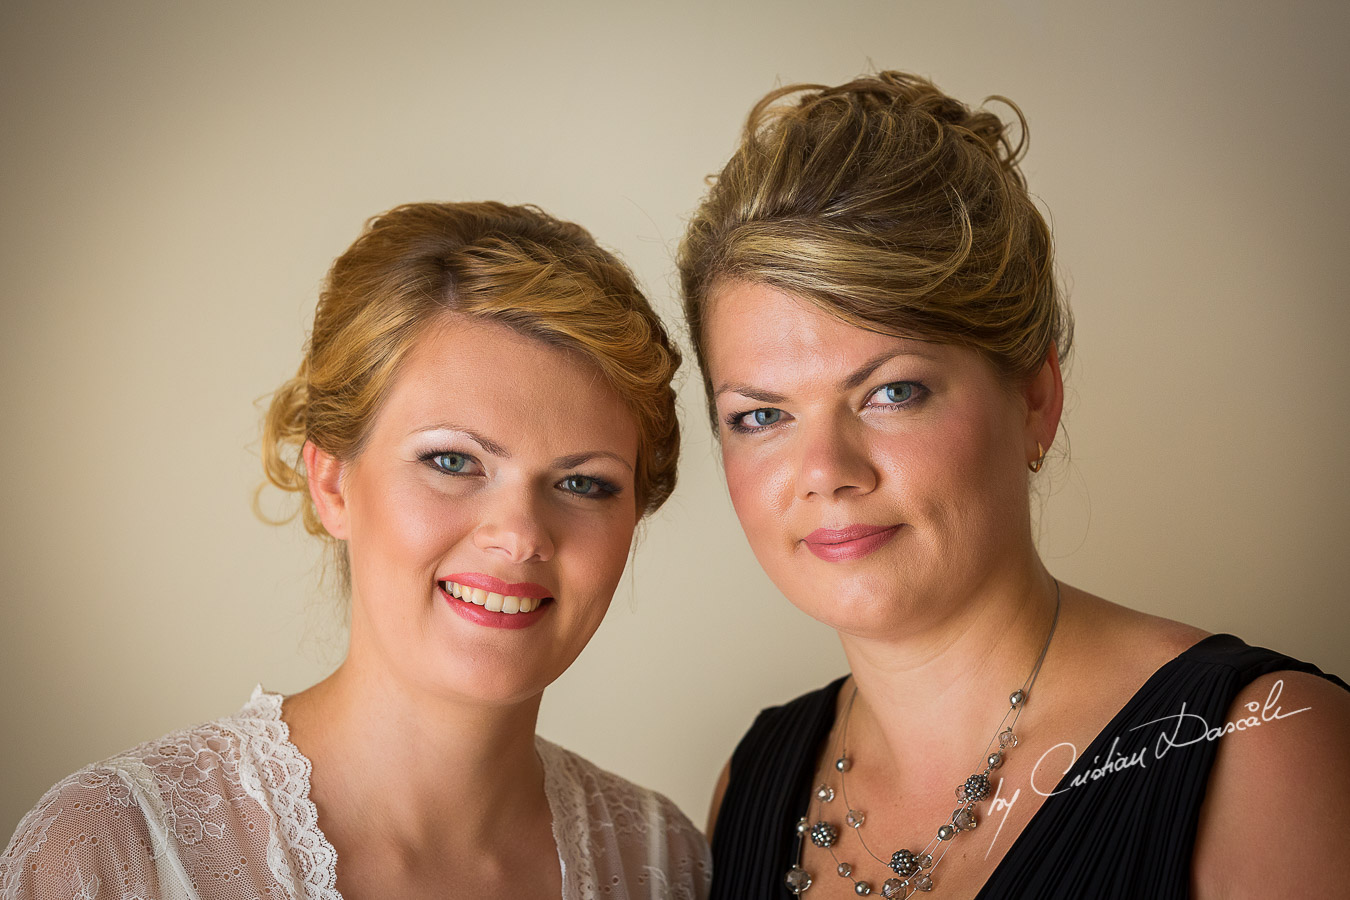 Bride Daria and her sister photographed few moments before the wedding at Elias Beach Hotel in Limassol